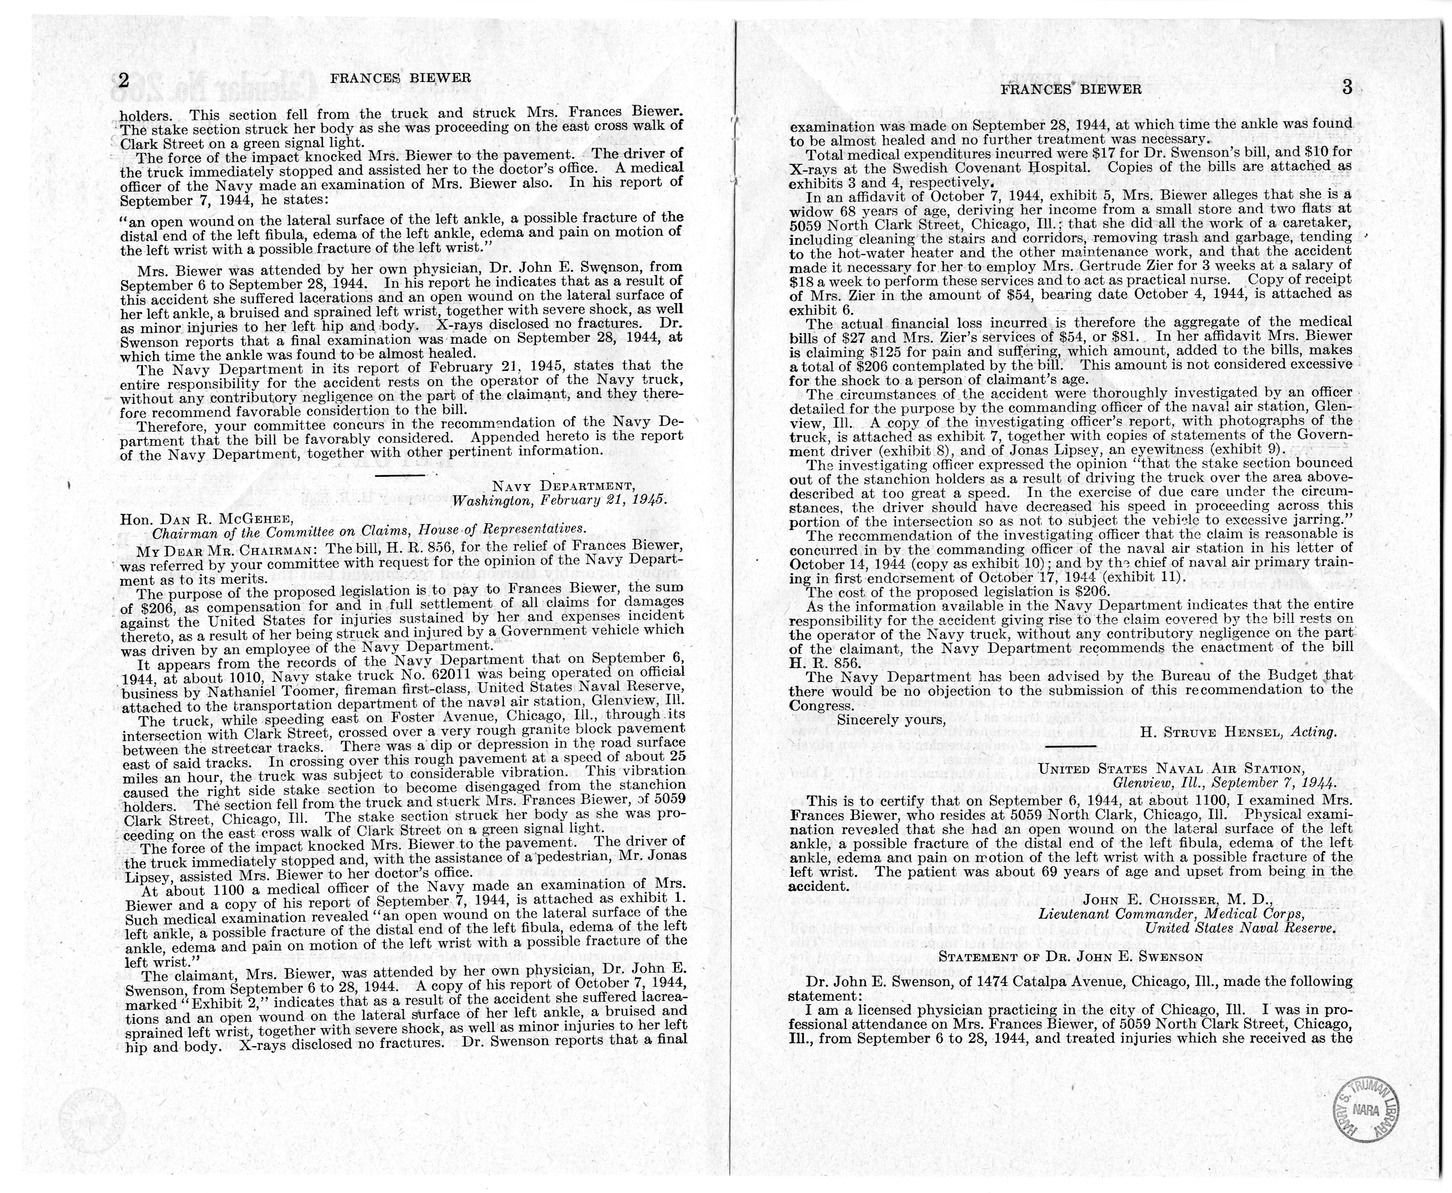 Memorandum from Frederick J. Bailey to M. C. Latta, H.R. 856, For the Relief of Frances Biewer, with Attachments